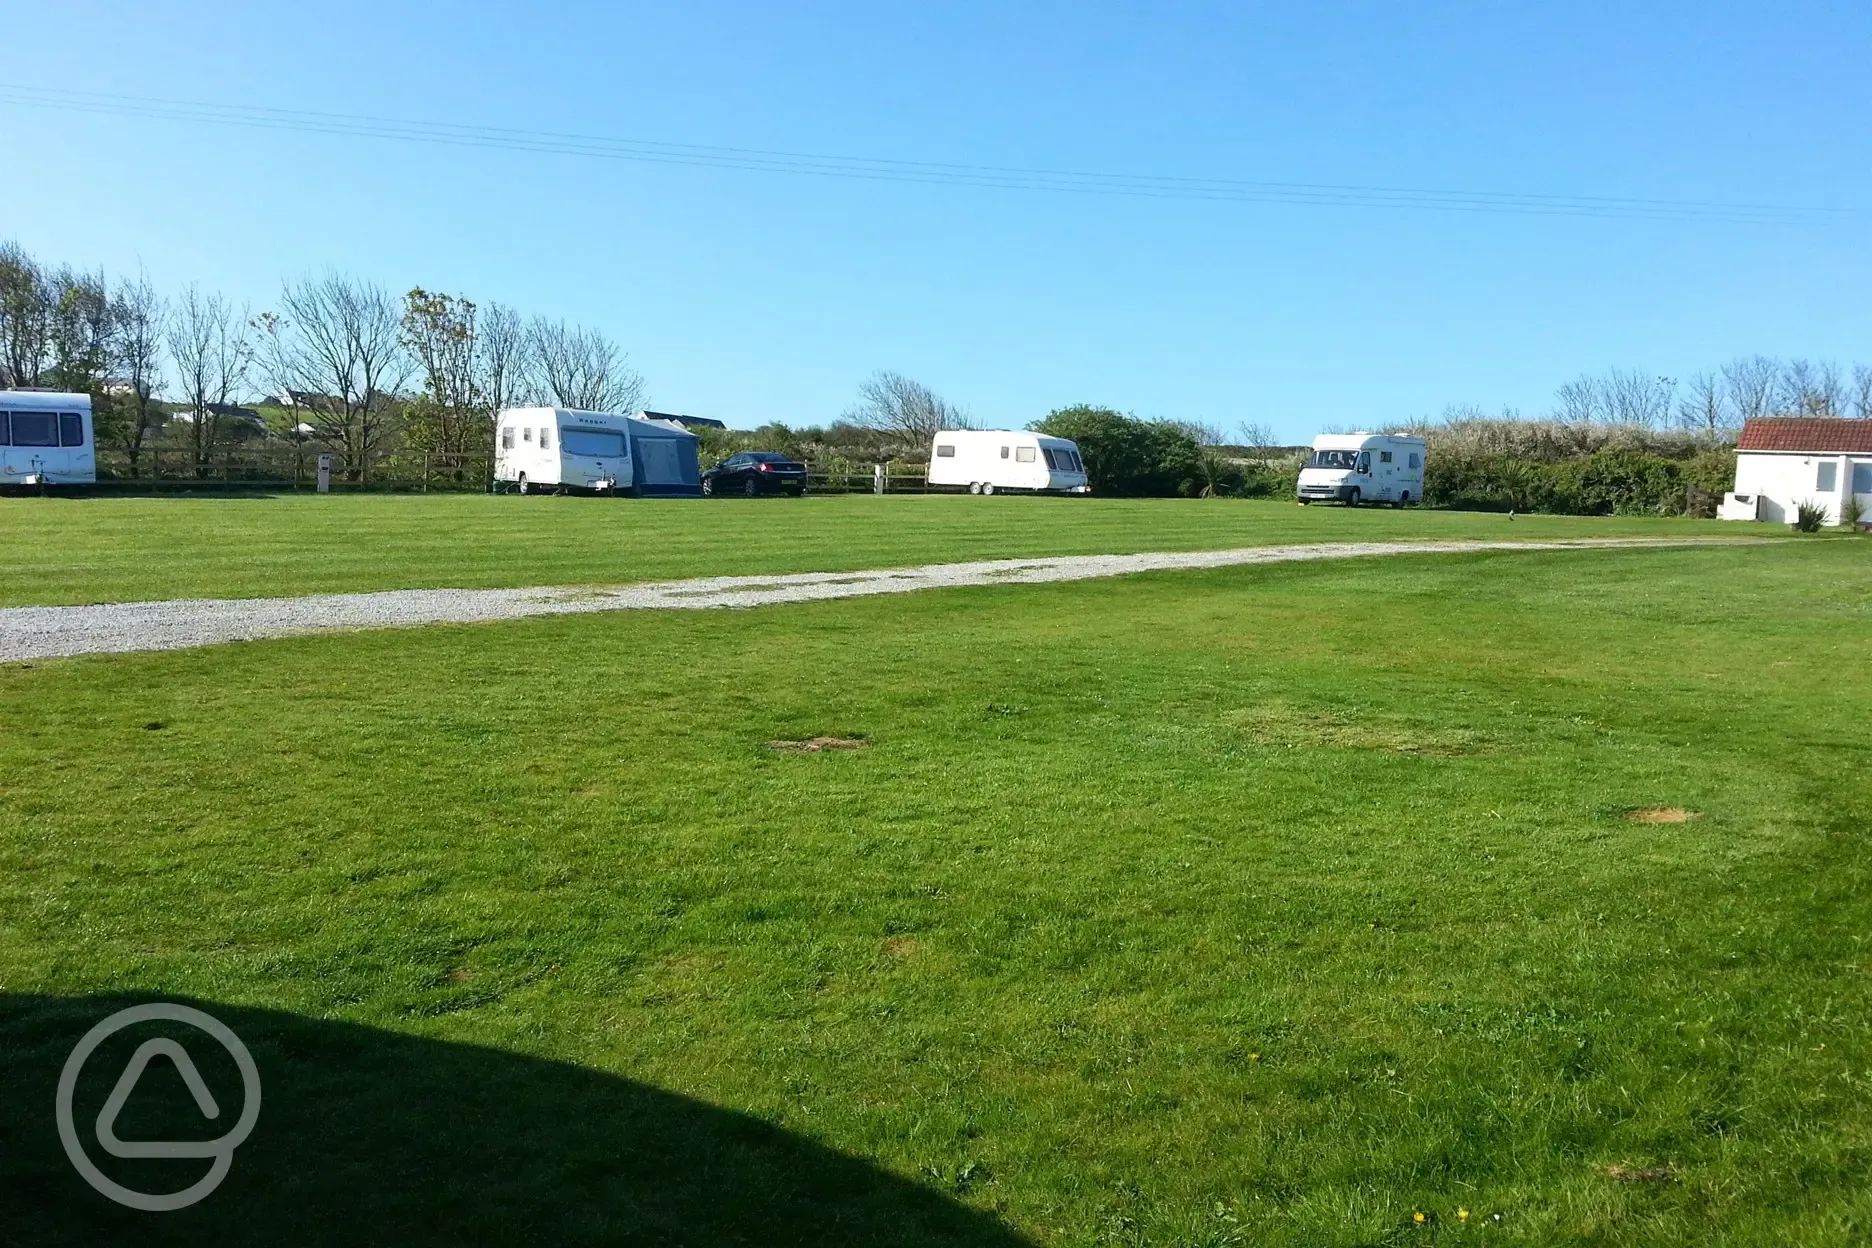 We are a small camp site only have 11 pitches